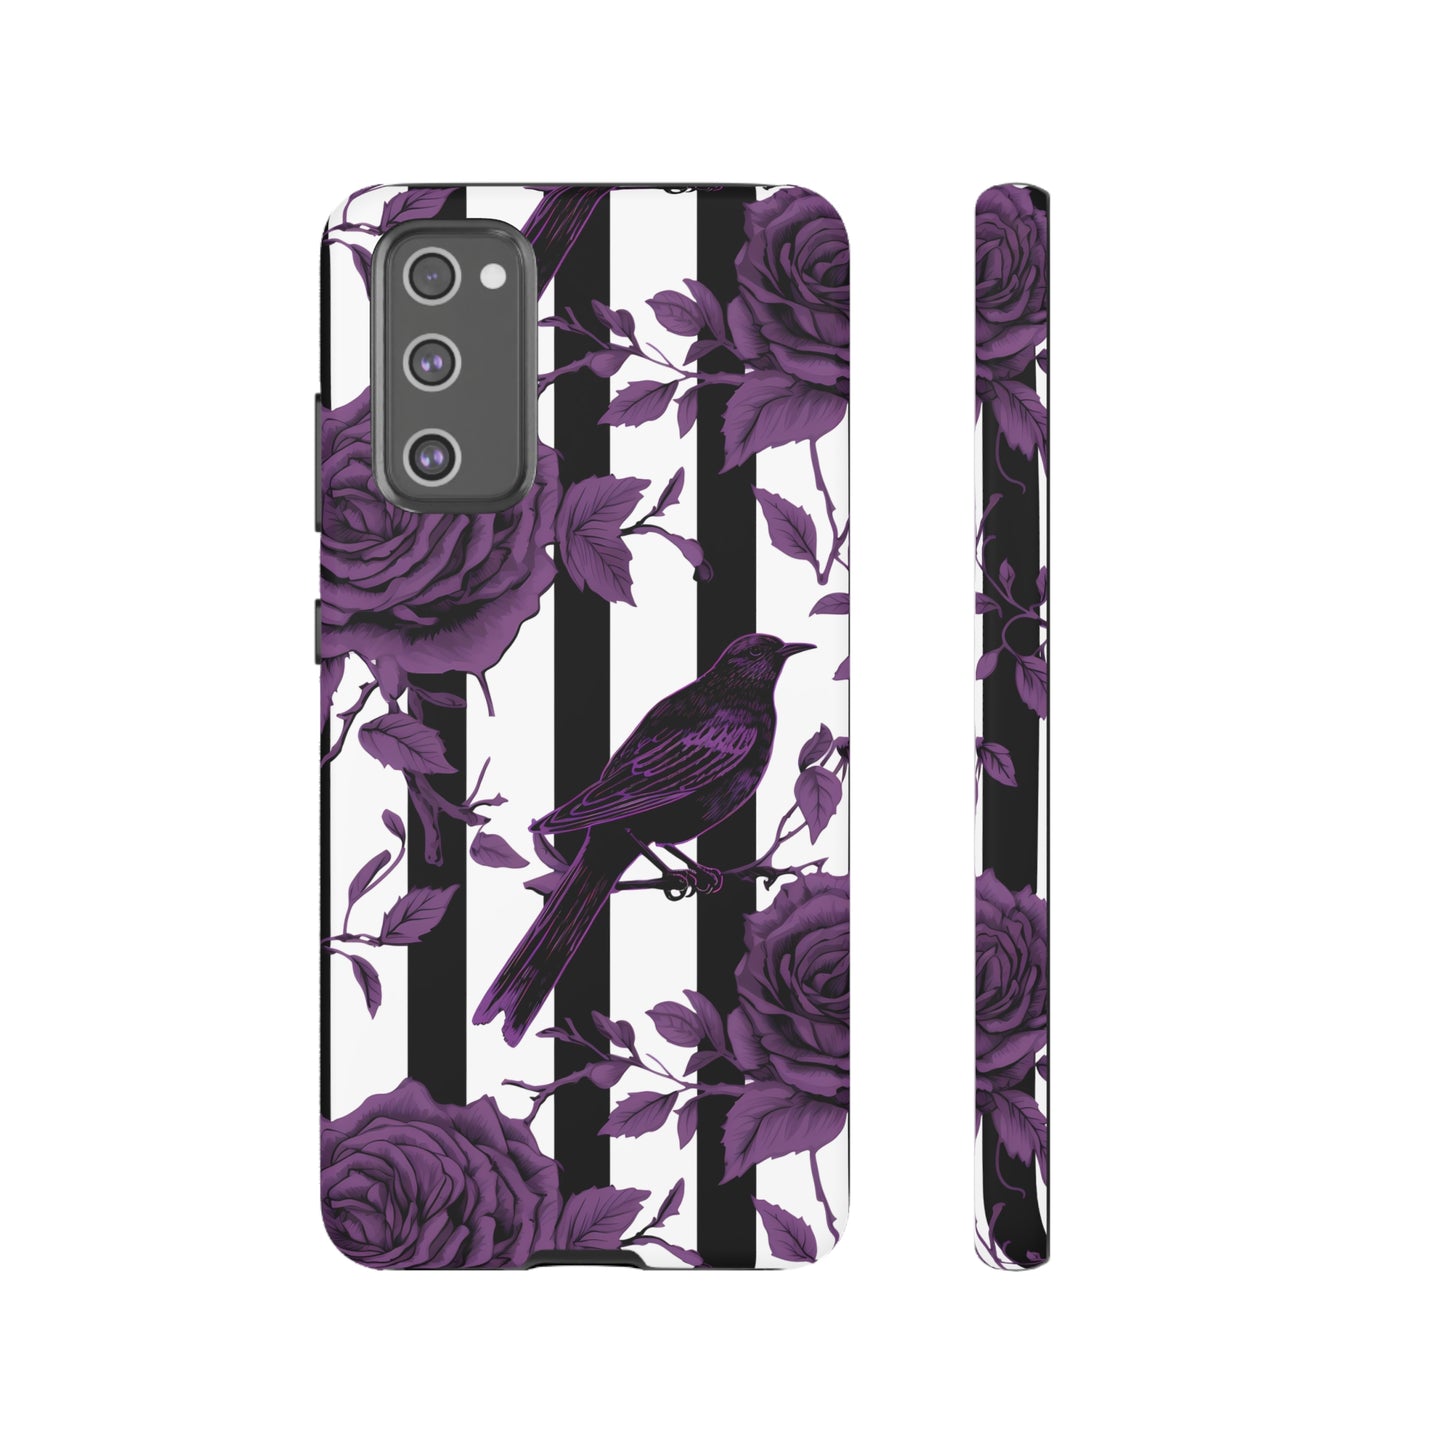 Striped Crows and Roses Tough Cases for iPhone Samsung Google PhonesPhone CaseVTZdesignsSamsung Galaxy S20 FEMatteAccessoriescrowsGlossy